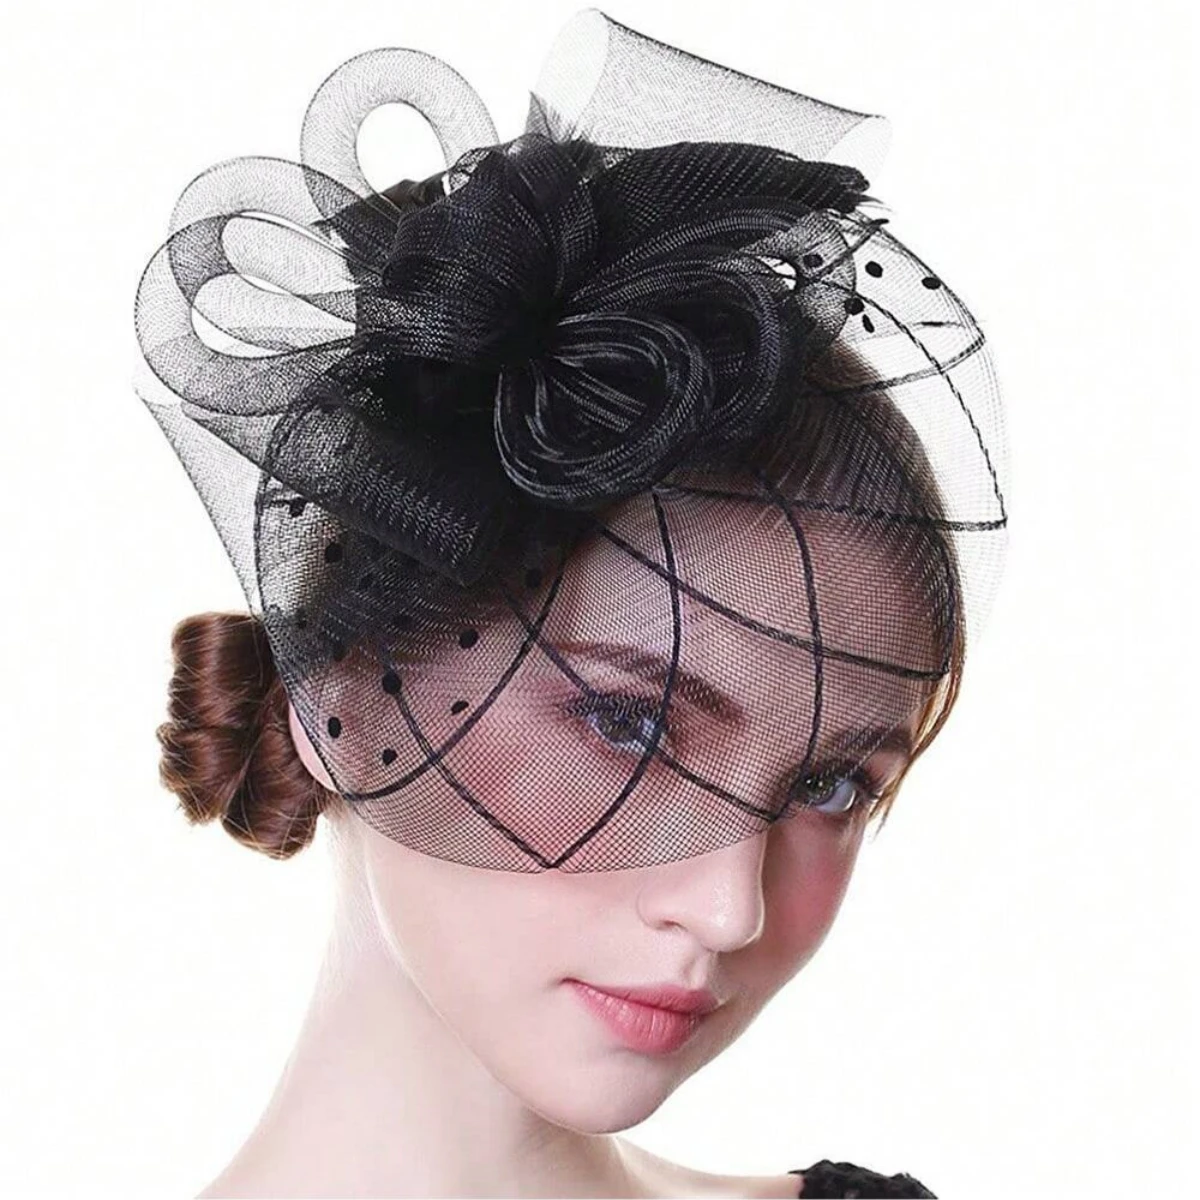 Women's Headwear Tea Party Church Wedding Mesh Cocktail Party Flower Feather Charming Clip Christmas Party Hair Accessories New organza gift bags 100pcs transparent jewelry bag heart gift bag for christmas gift bags storage packaging drawstring mesh sachet